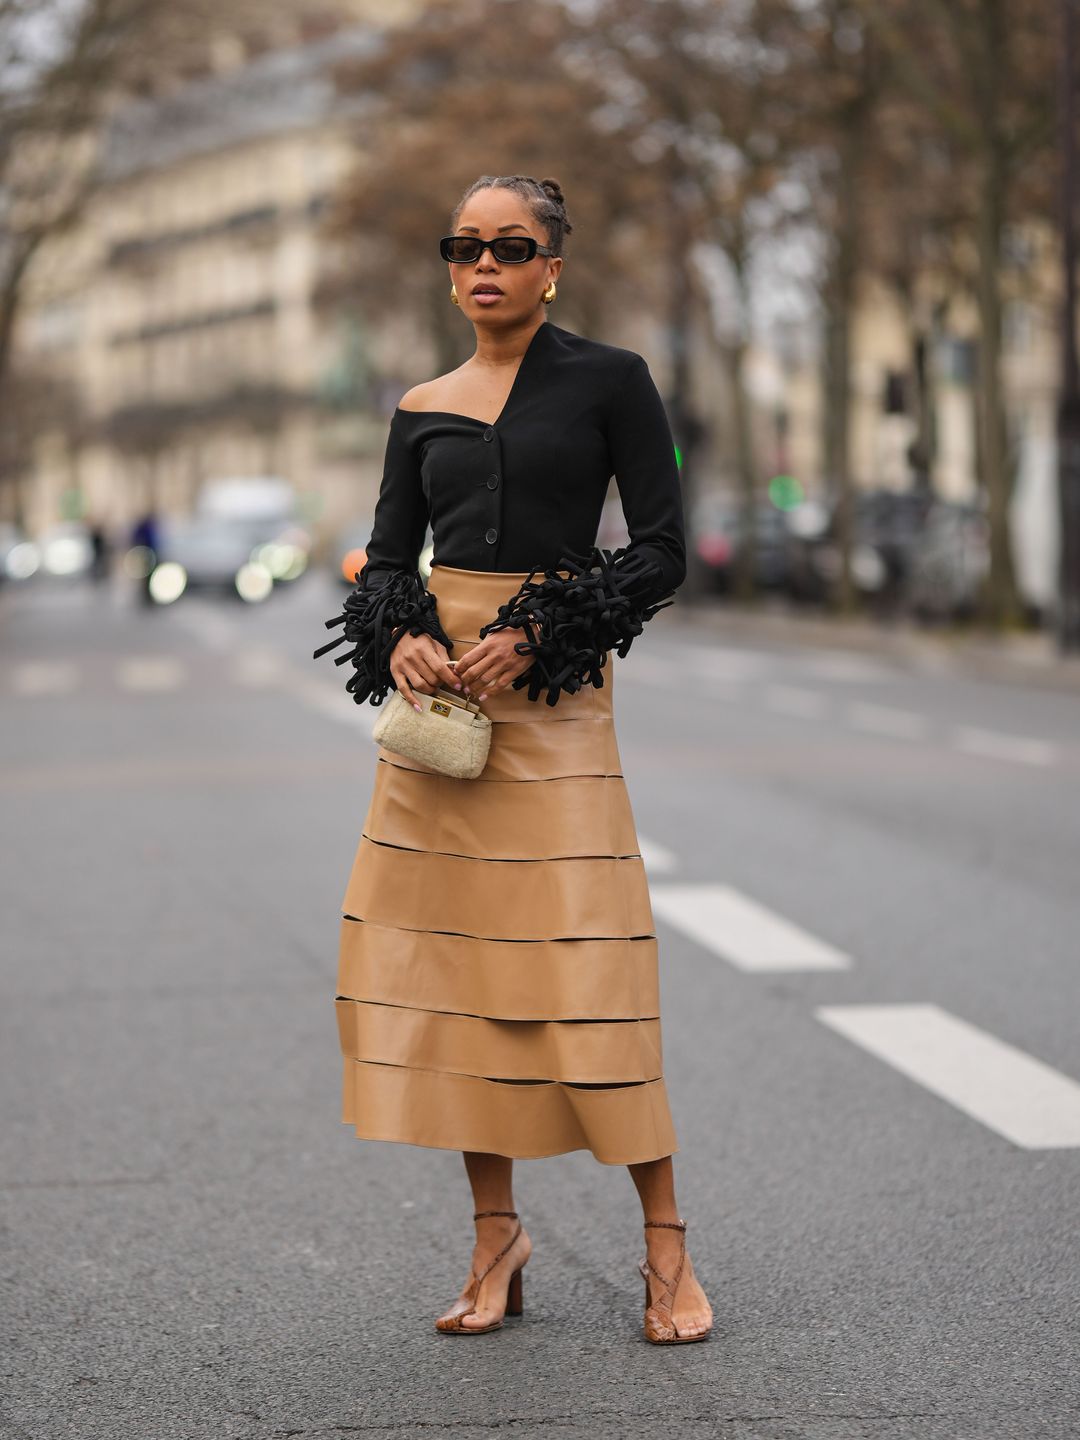 Ellie Delphine wears statement sleeve top and camel skirt 